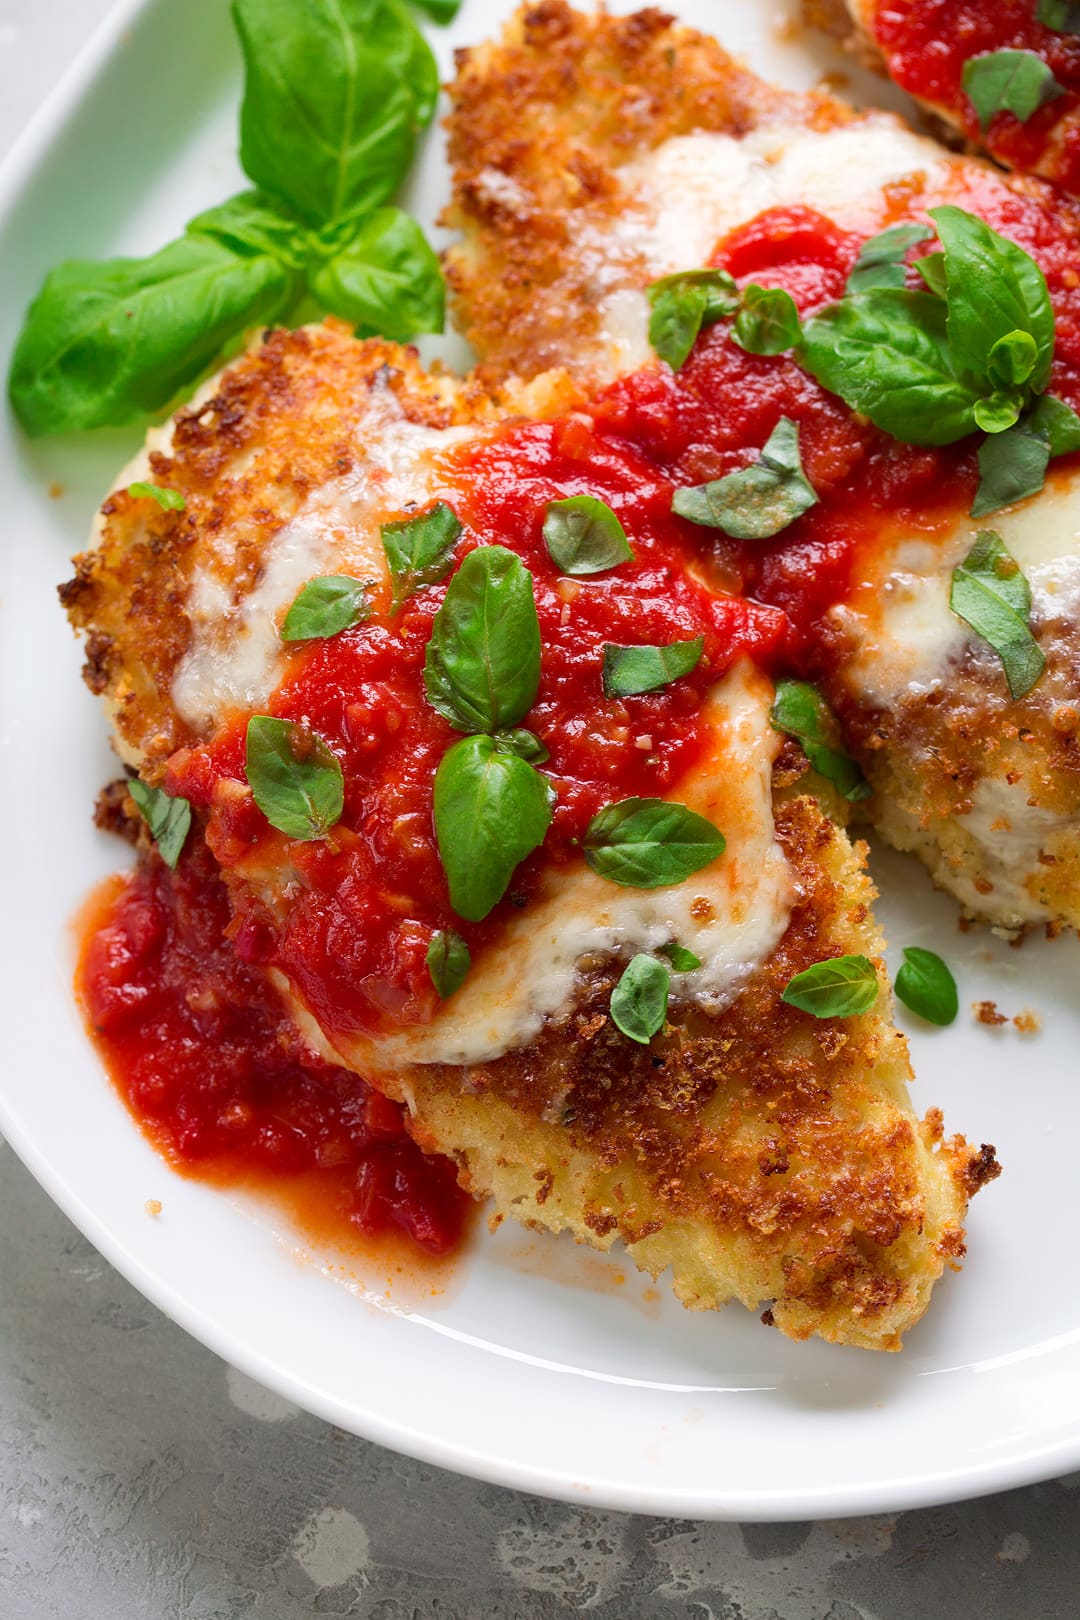 Overhead close up image of two pieces chicken parmesan on a white serving plate. Chicken is covered with golden brown Panko bread crumbs, melted mozzarella, marinara sauce and fresh basil.